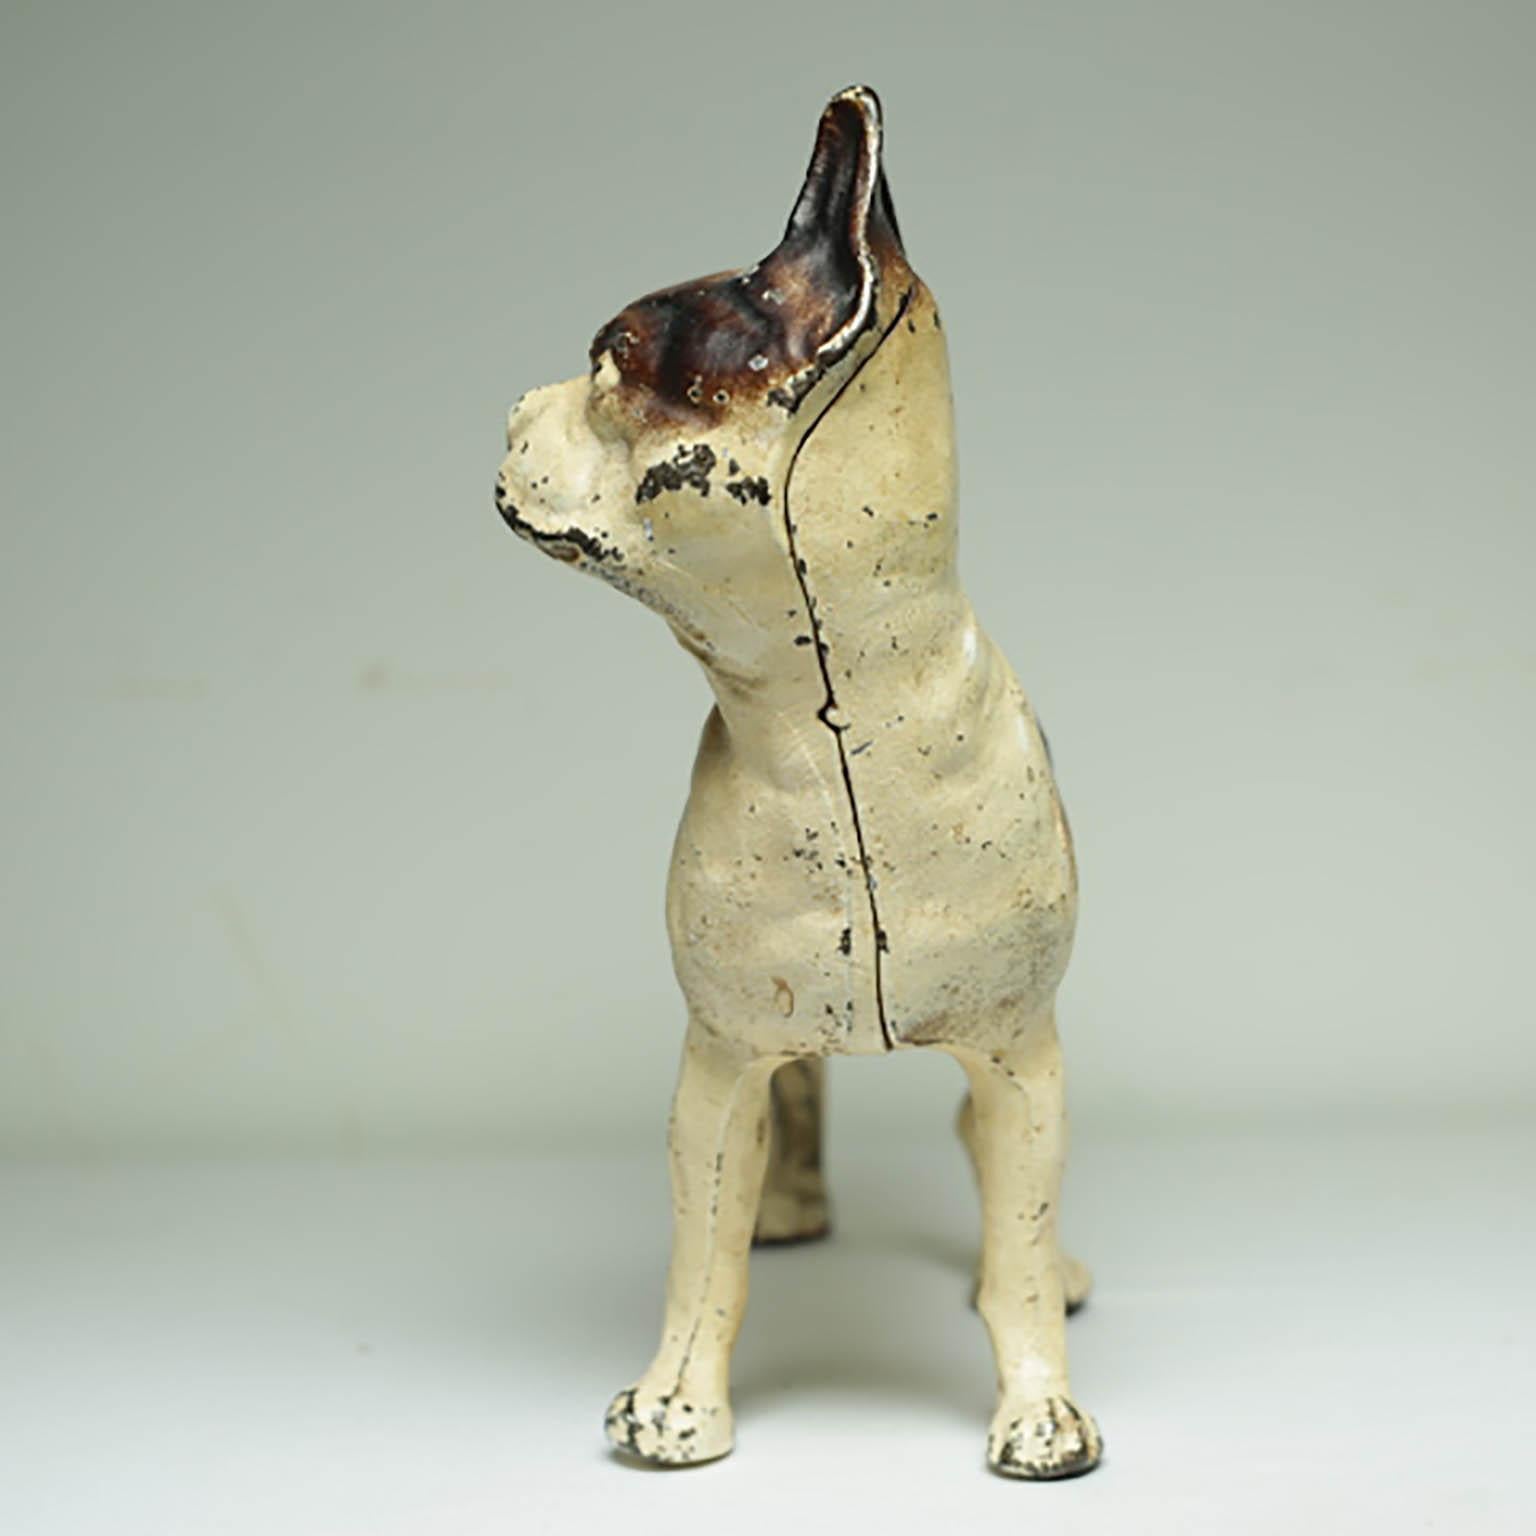 ABOUT

This is an original cast iron Boston Terrier doorstop in the style of the Hubley Manufacturing Company in Lancaster Pennsylvania USA. The piece has retained its original hand painted finish and is in excellent condition with the appropriate